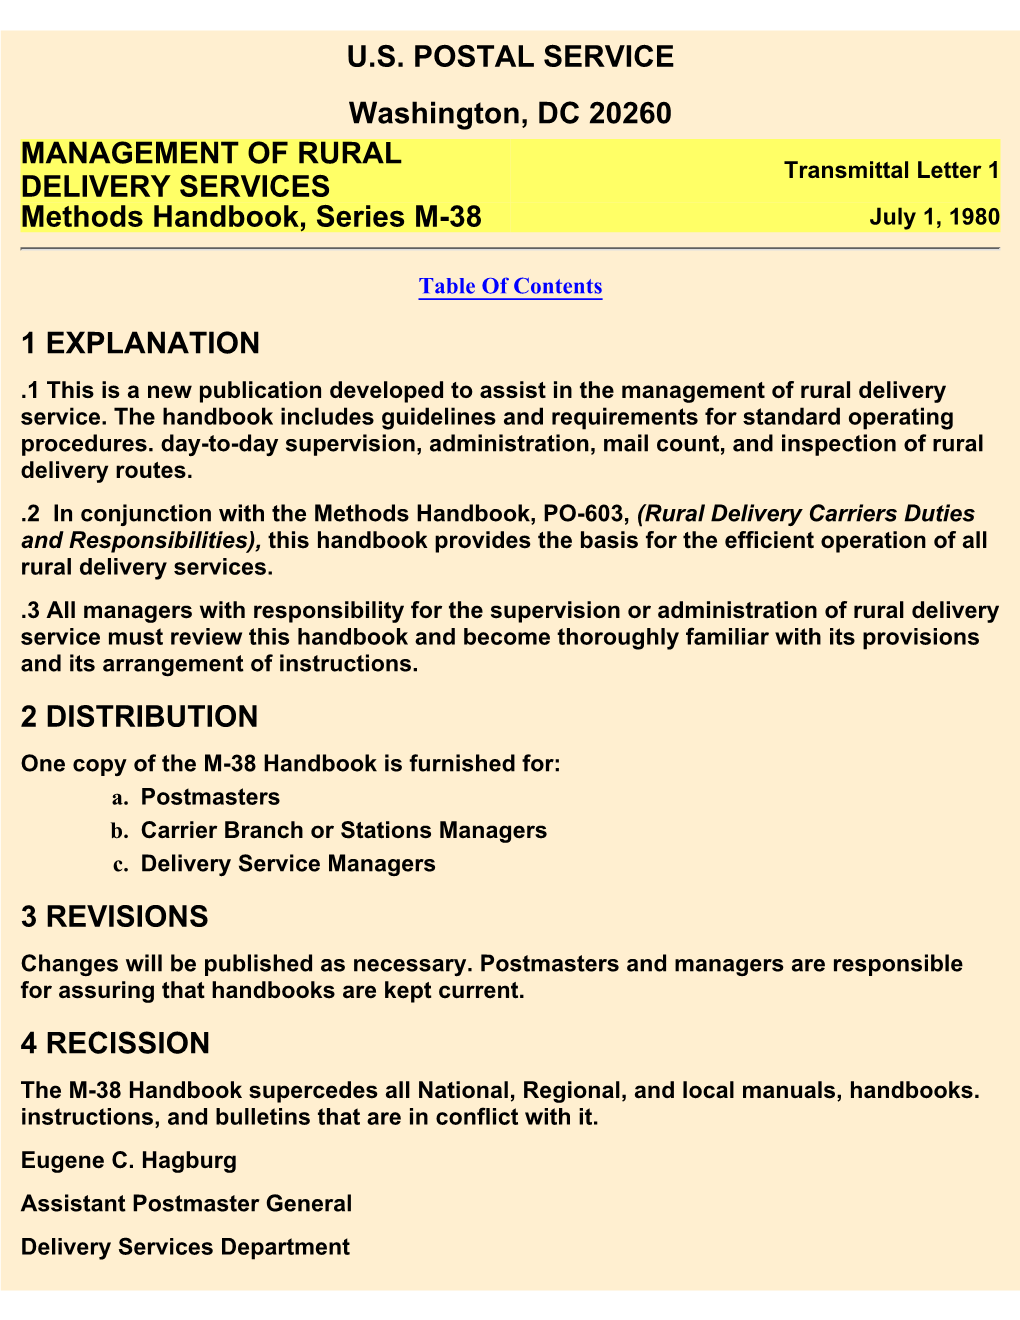 M-38: Management of Rural Delivery Services